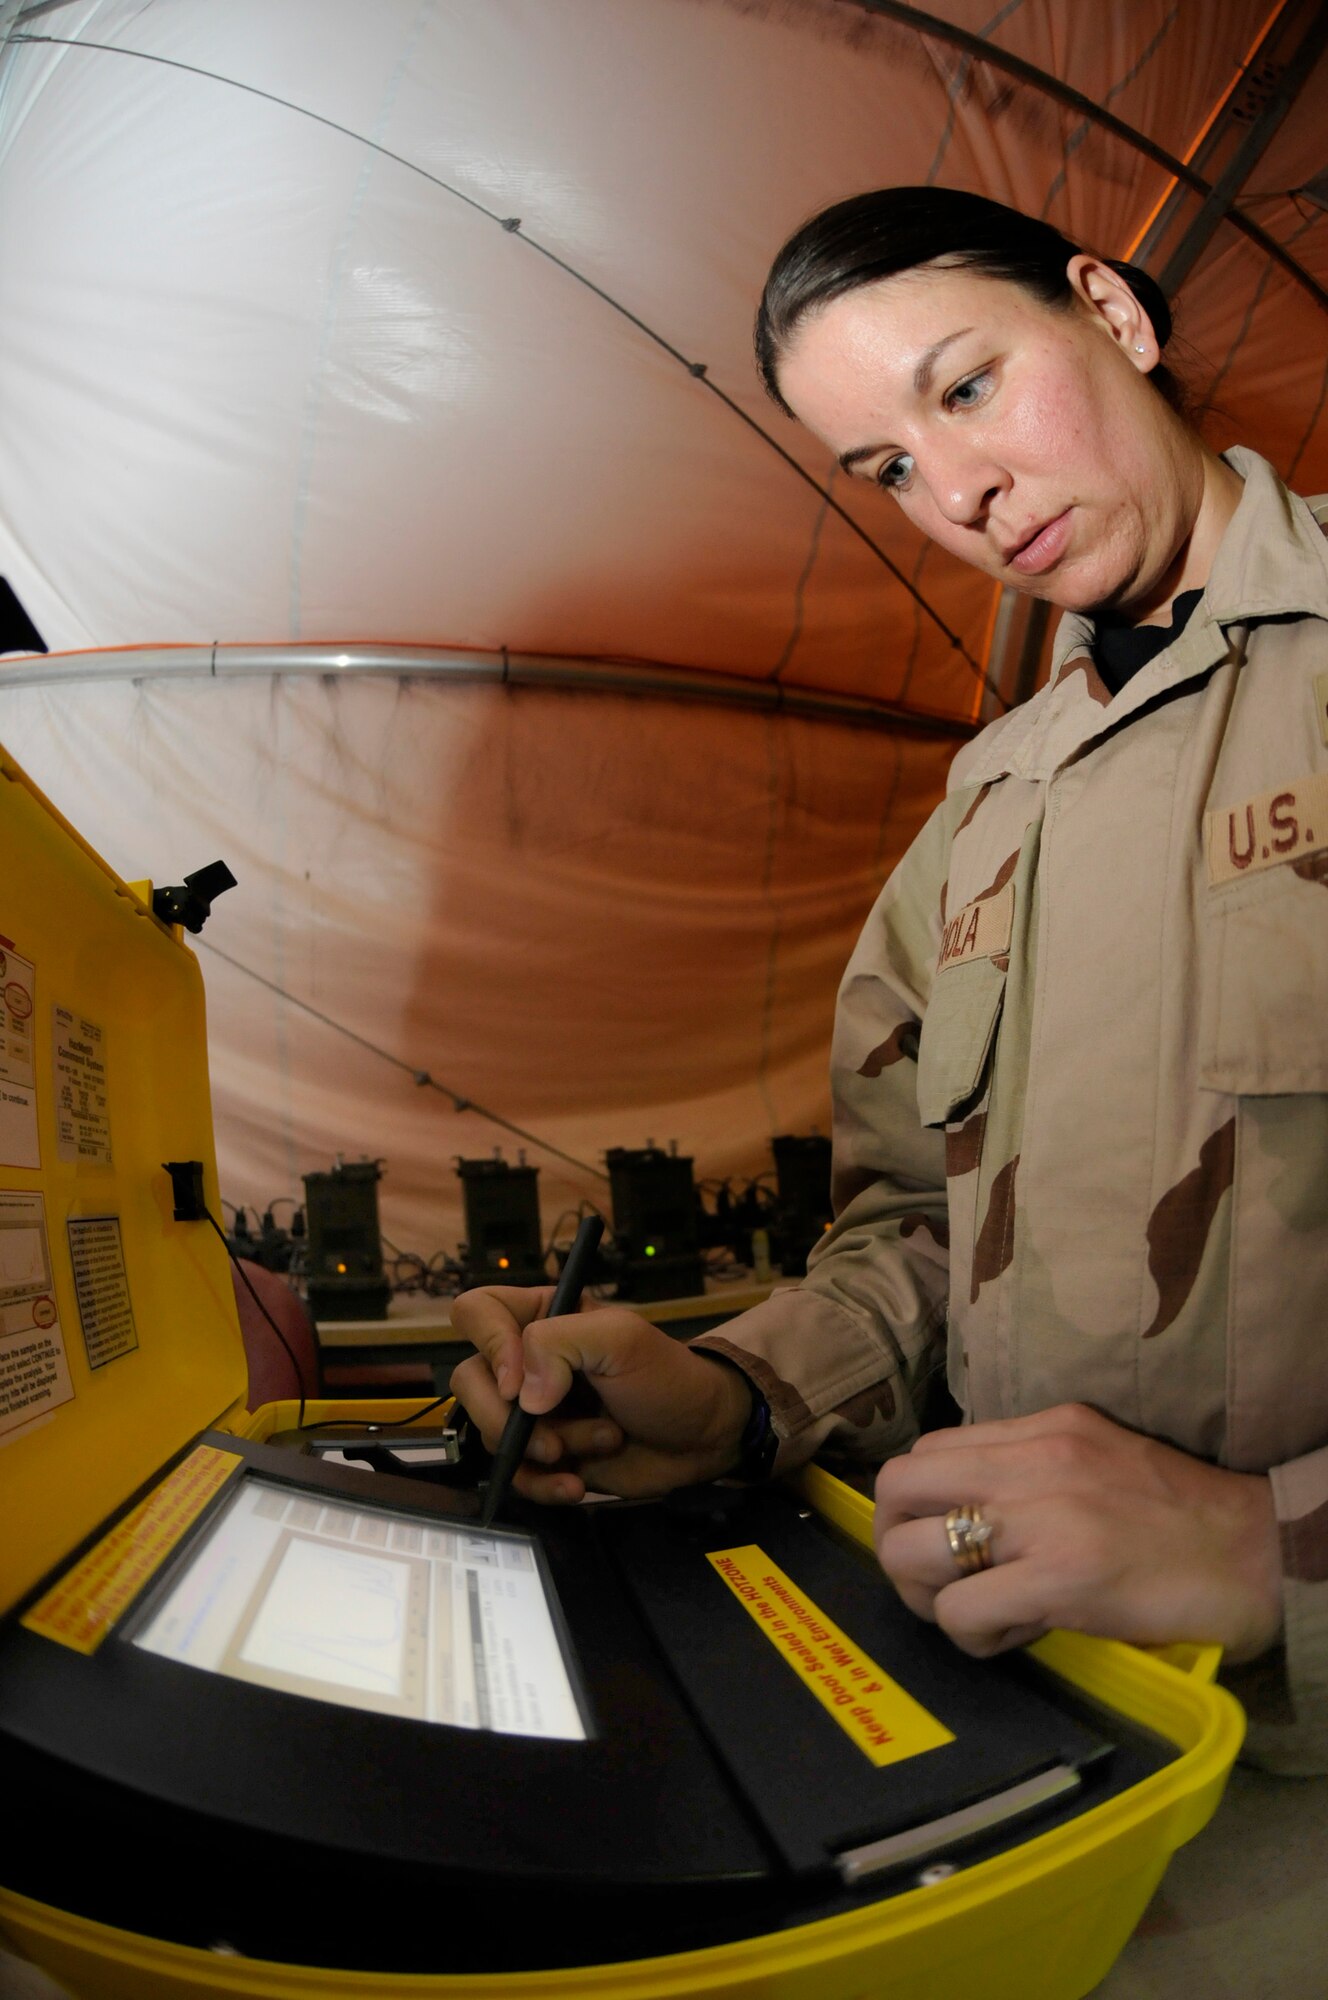 Staff Sgt. Heather Mendiola, non-commissioned officer in charge of emergency management logistics assigned to the 379th Expeditionary Civil Engineer Squadron, performs an operational check on a hazardous material identifier Oct. 1, 2008, at an undisclosed air base in Southwest Asia. The equipment is used to produce a presumptive identification of liquid, powder, or solid hazardous materials so emergency management can provide instruction on what type of protective gear is required. Sergeant Mendiola, a native of New Castle, Del., is deployed from Anderson Air Base, Guam, in support of Operations Iraqi and Enduring Freedom and Joint Task Force-Horn of Africa. (U.S. Air Force photo by Staff Sgt. Darnell T. Cannady/Released)